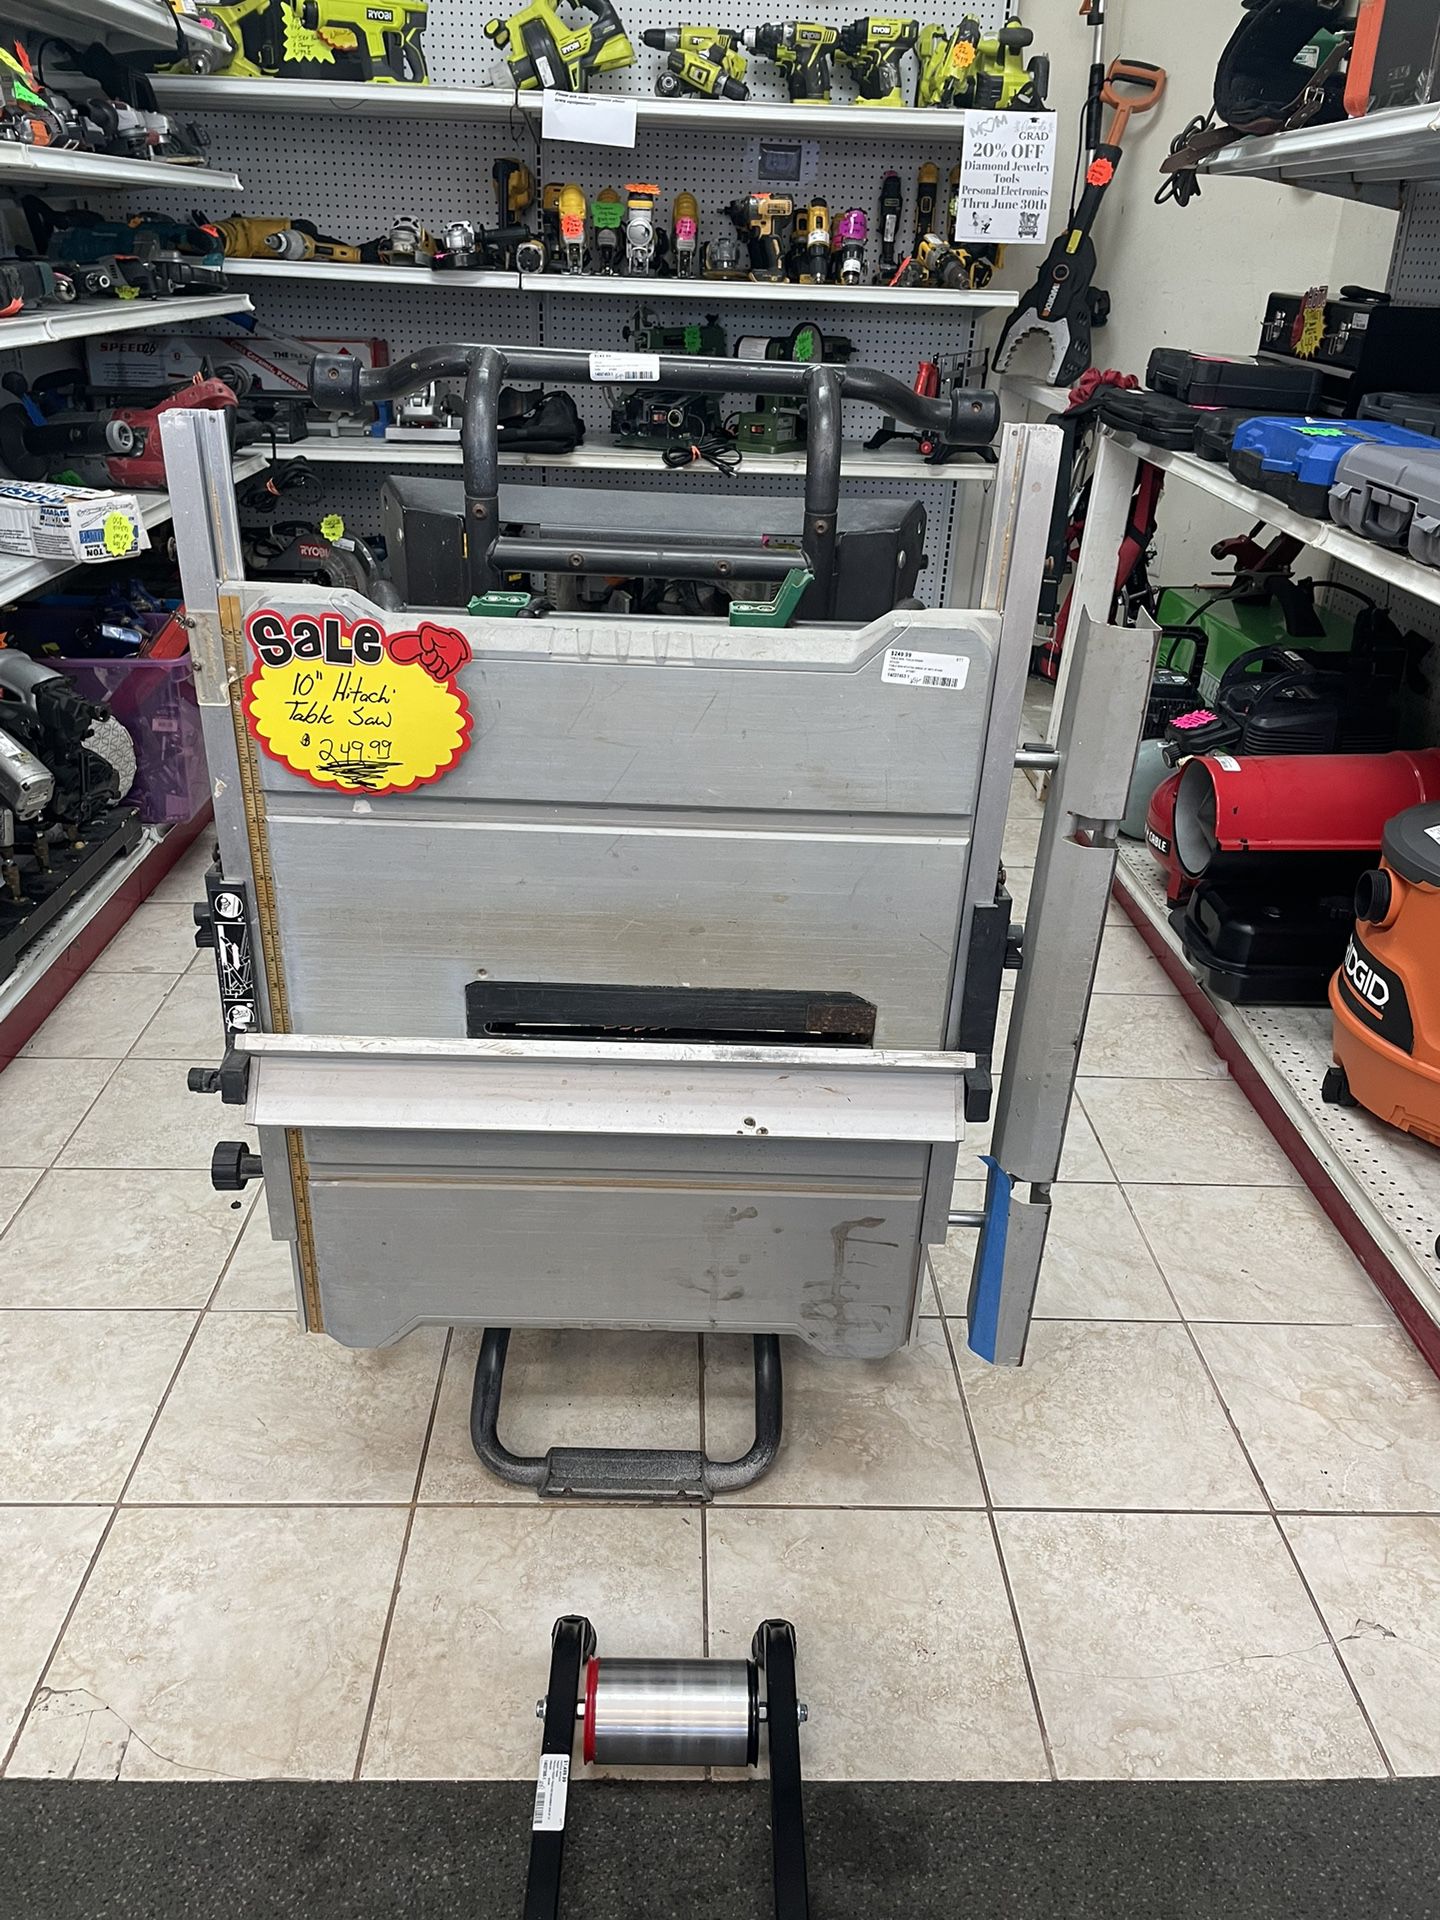 Hitachi 10” Table Saw With Stand 